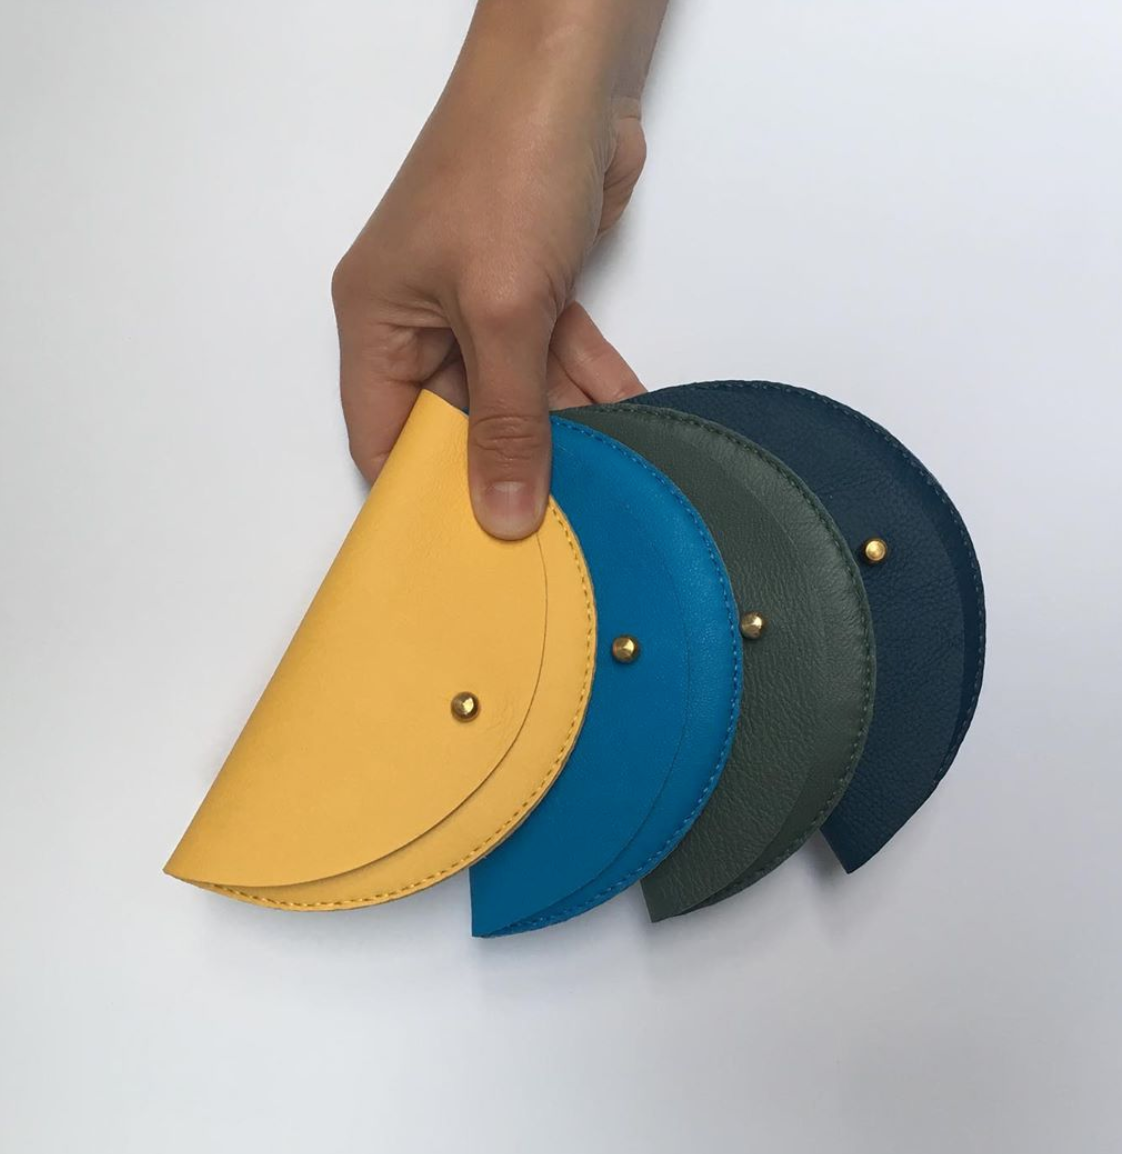 Colette Grande Coin Purse in Leather & Suede | various | by Jude Gove - Lifestory - Jude Gove